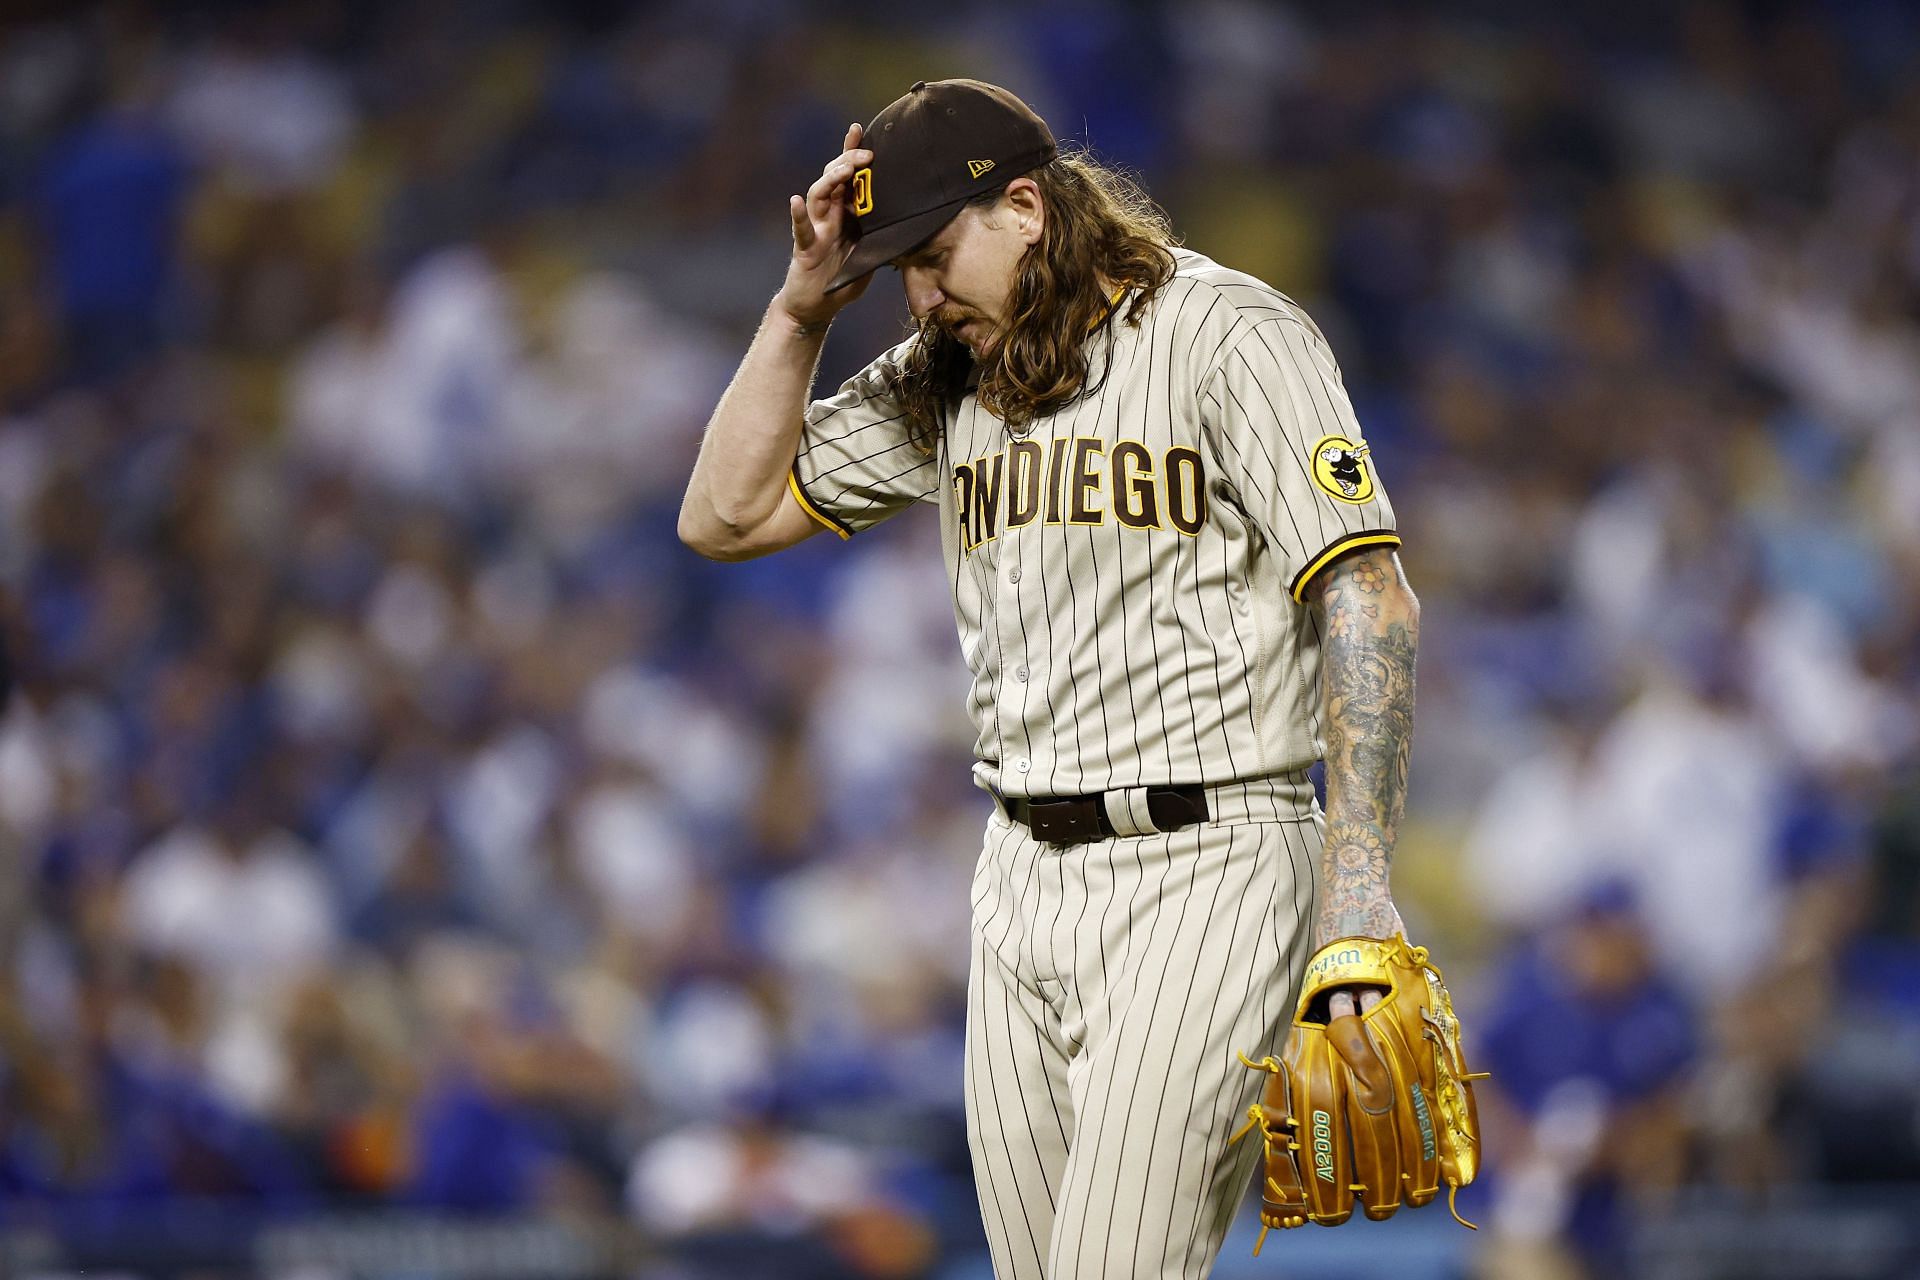 White Sox pitcher Mike Clevinger will not face discipline from MLB